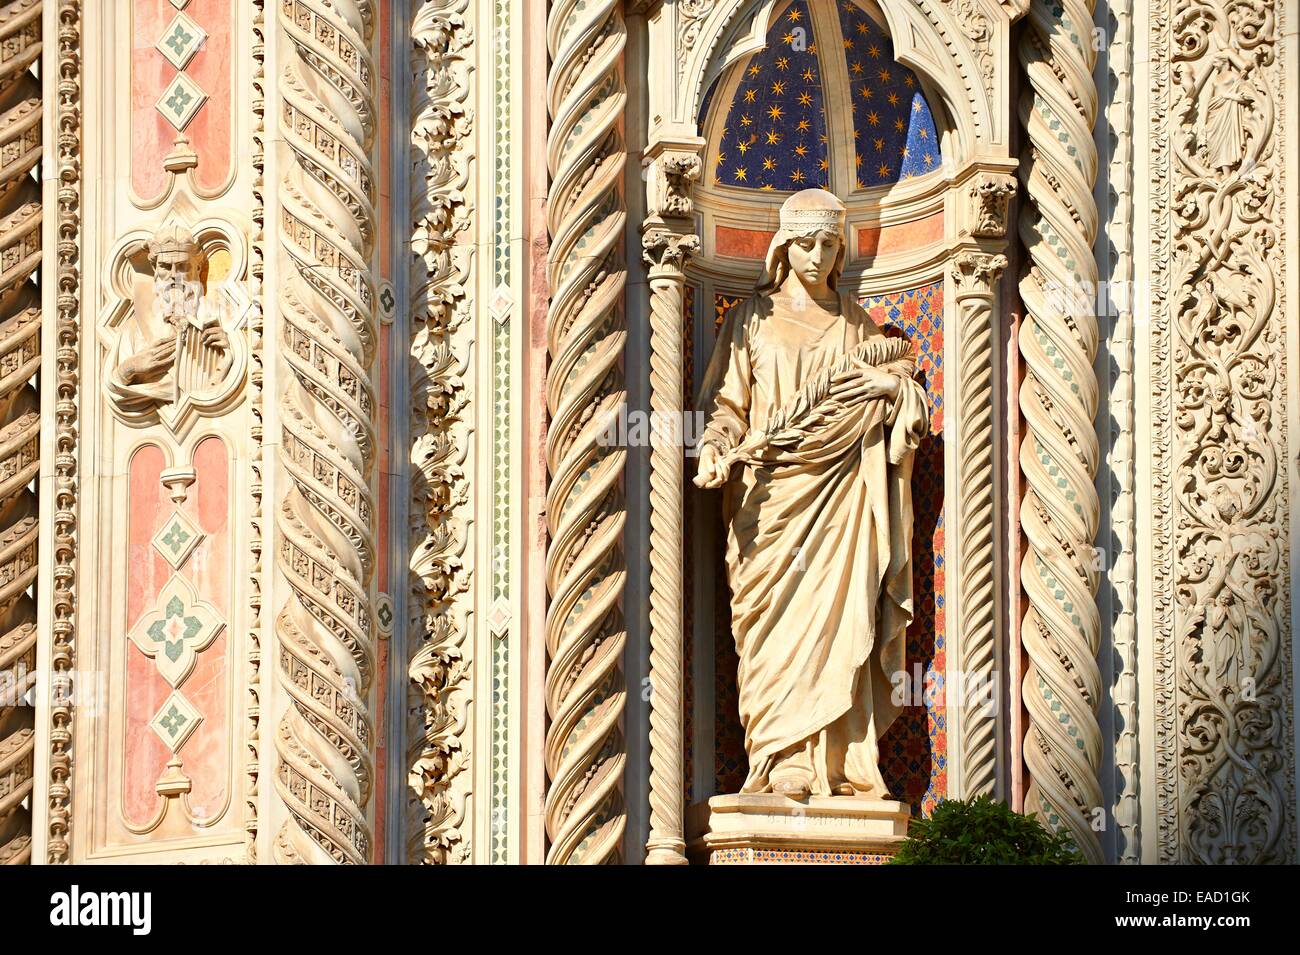 Statue of Saint Reparata on the facade of the Duomo of Florence, Cattedrale di Santa Maria del Fiore, Florence, Tuscany, Italy Stock Photo